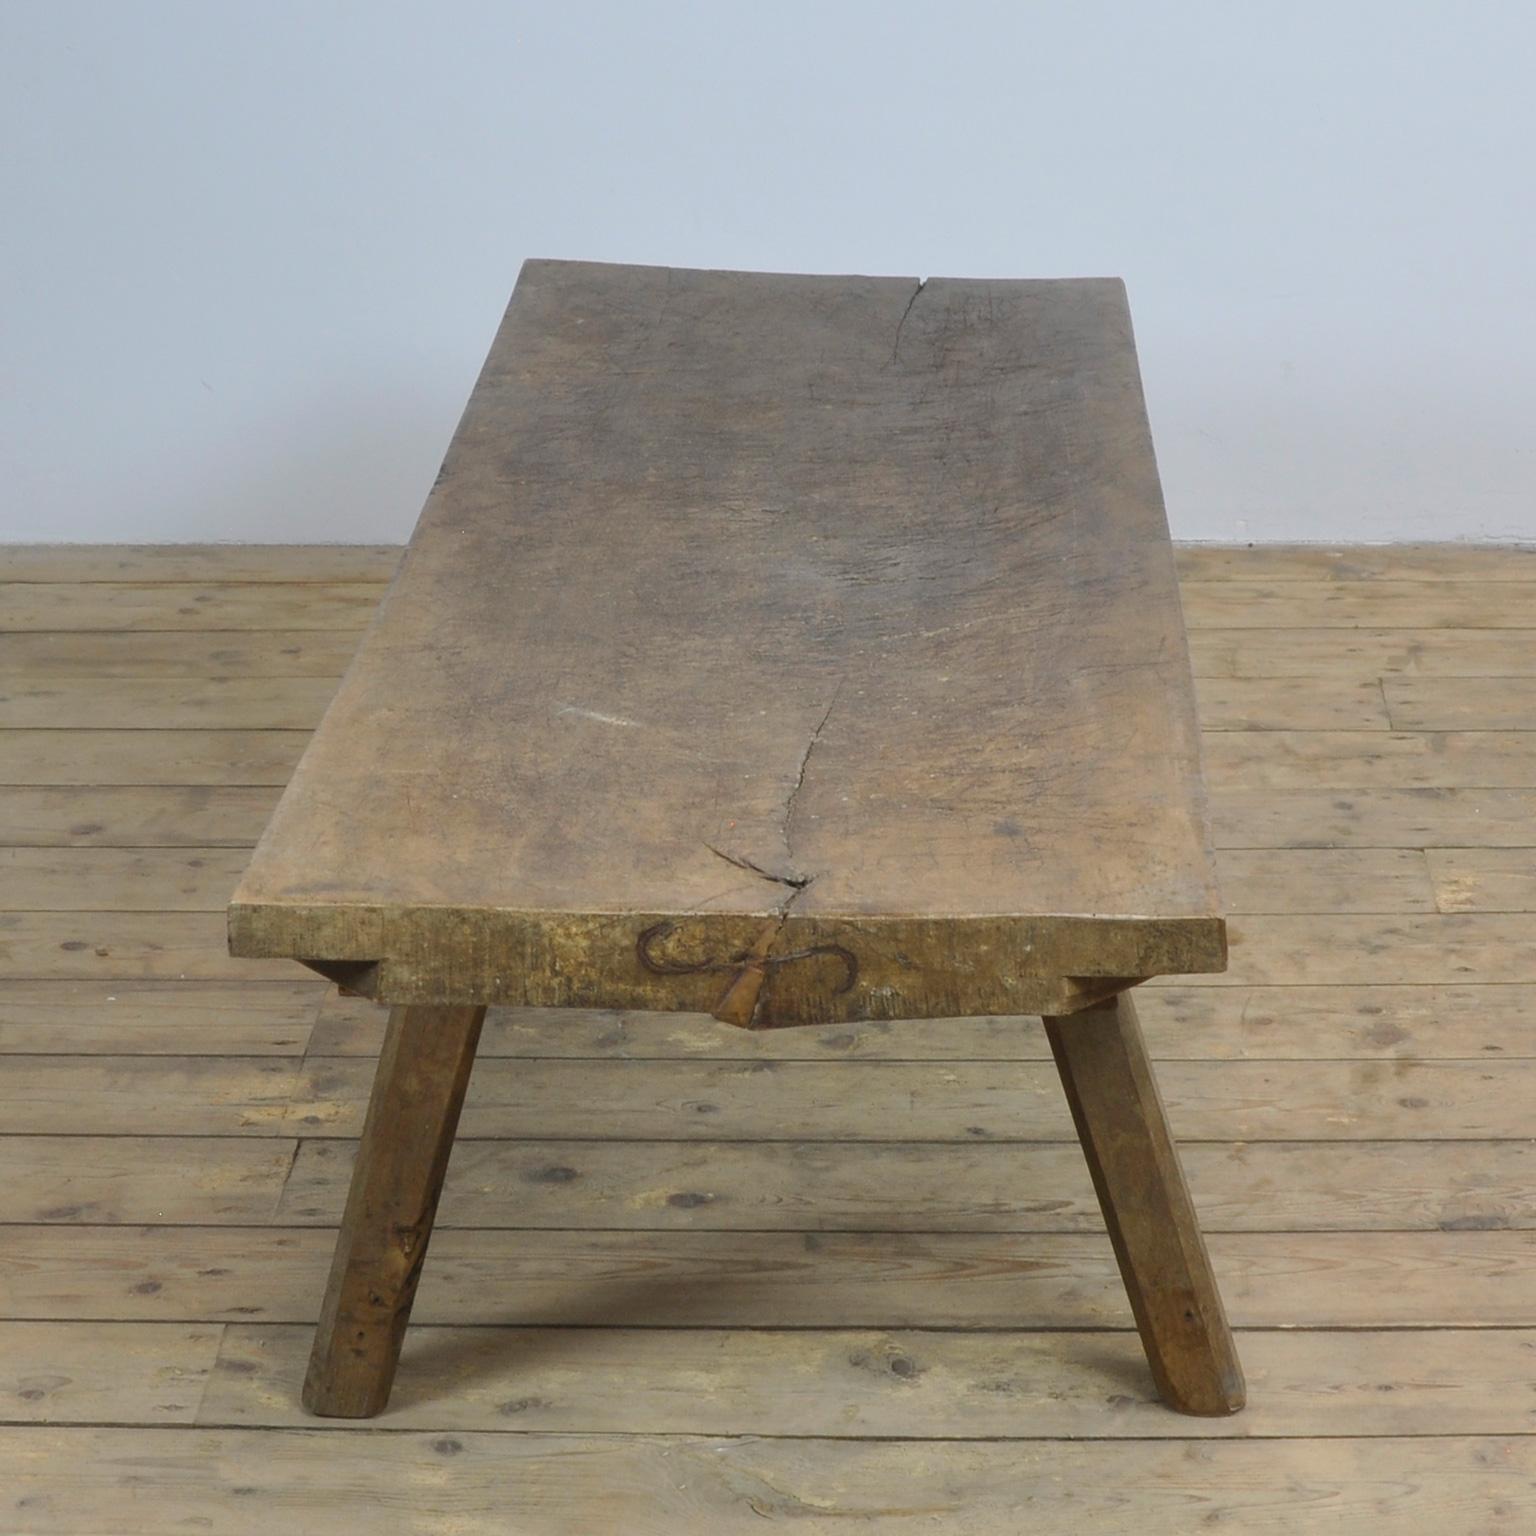 This oak butcher's table was produced in Hungary, circa 1930s and has a 7 cm thick top. The legs has been cut down to a standard coffee table or bench size.